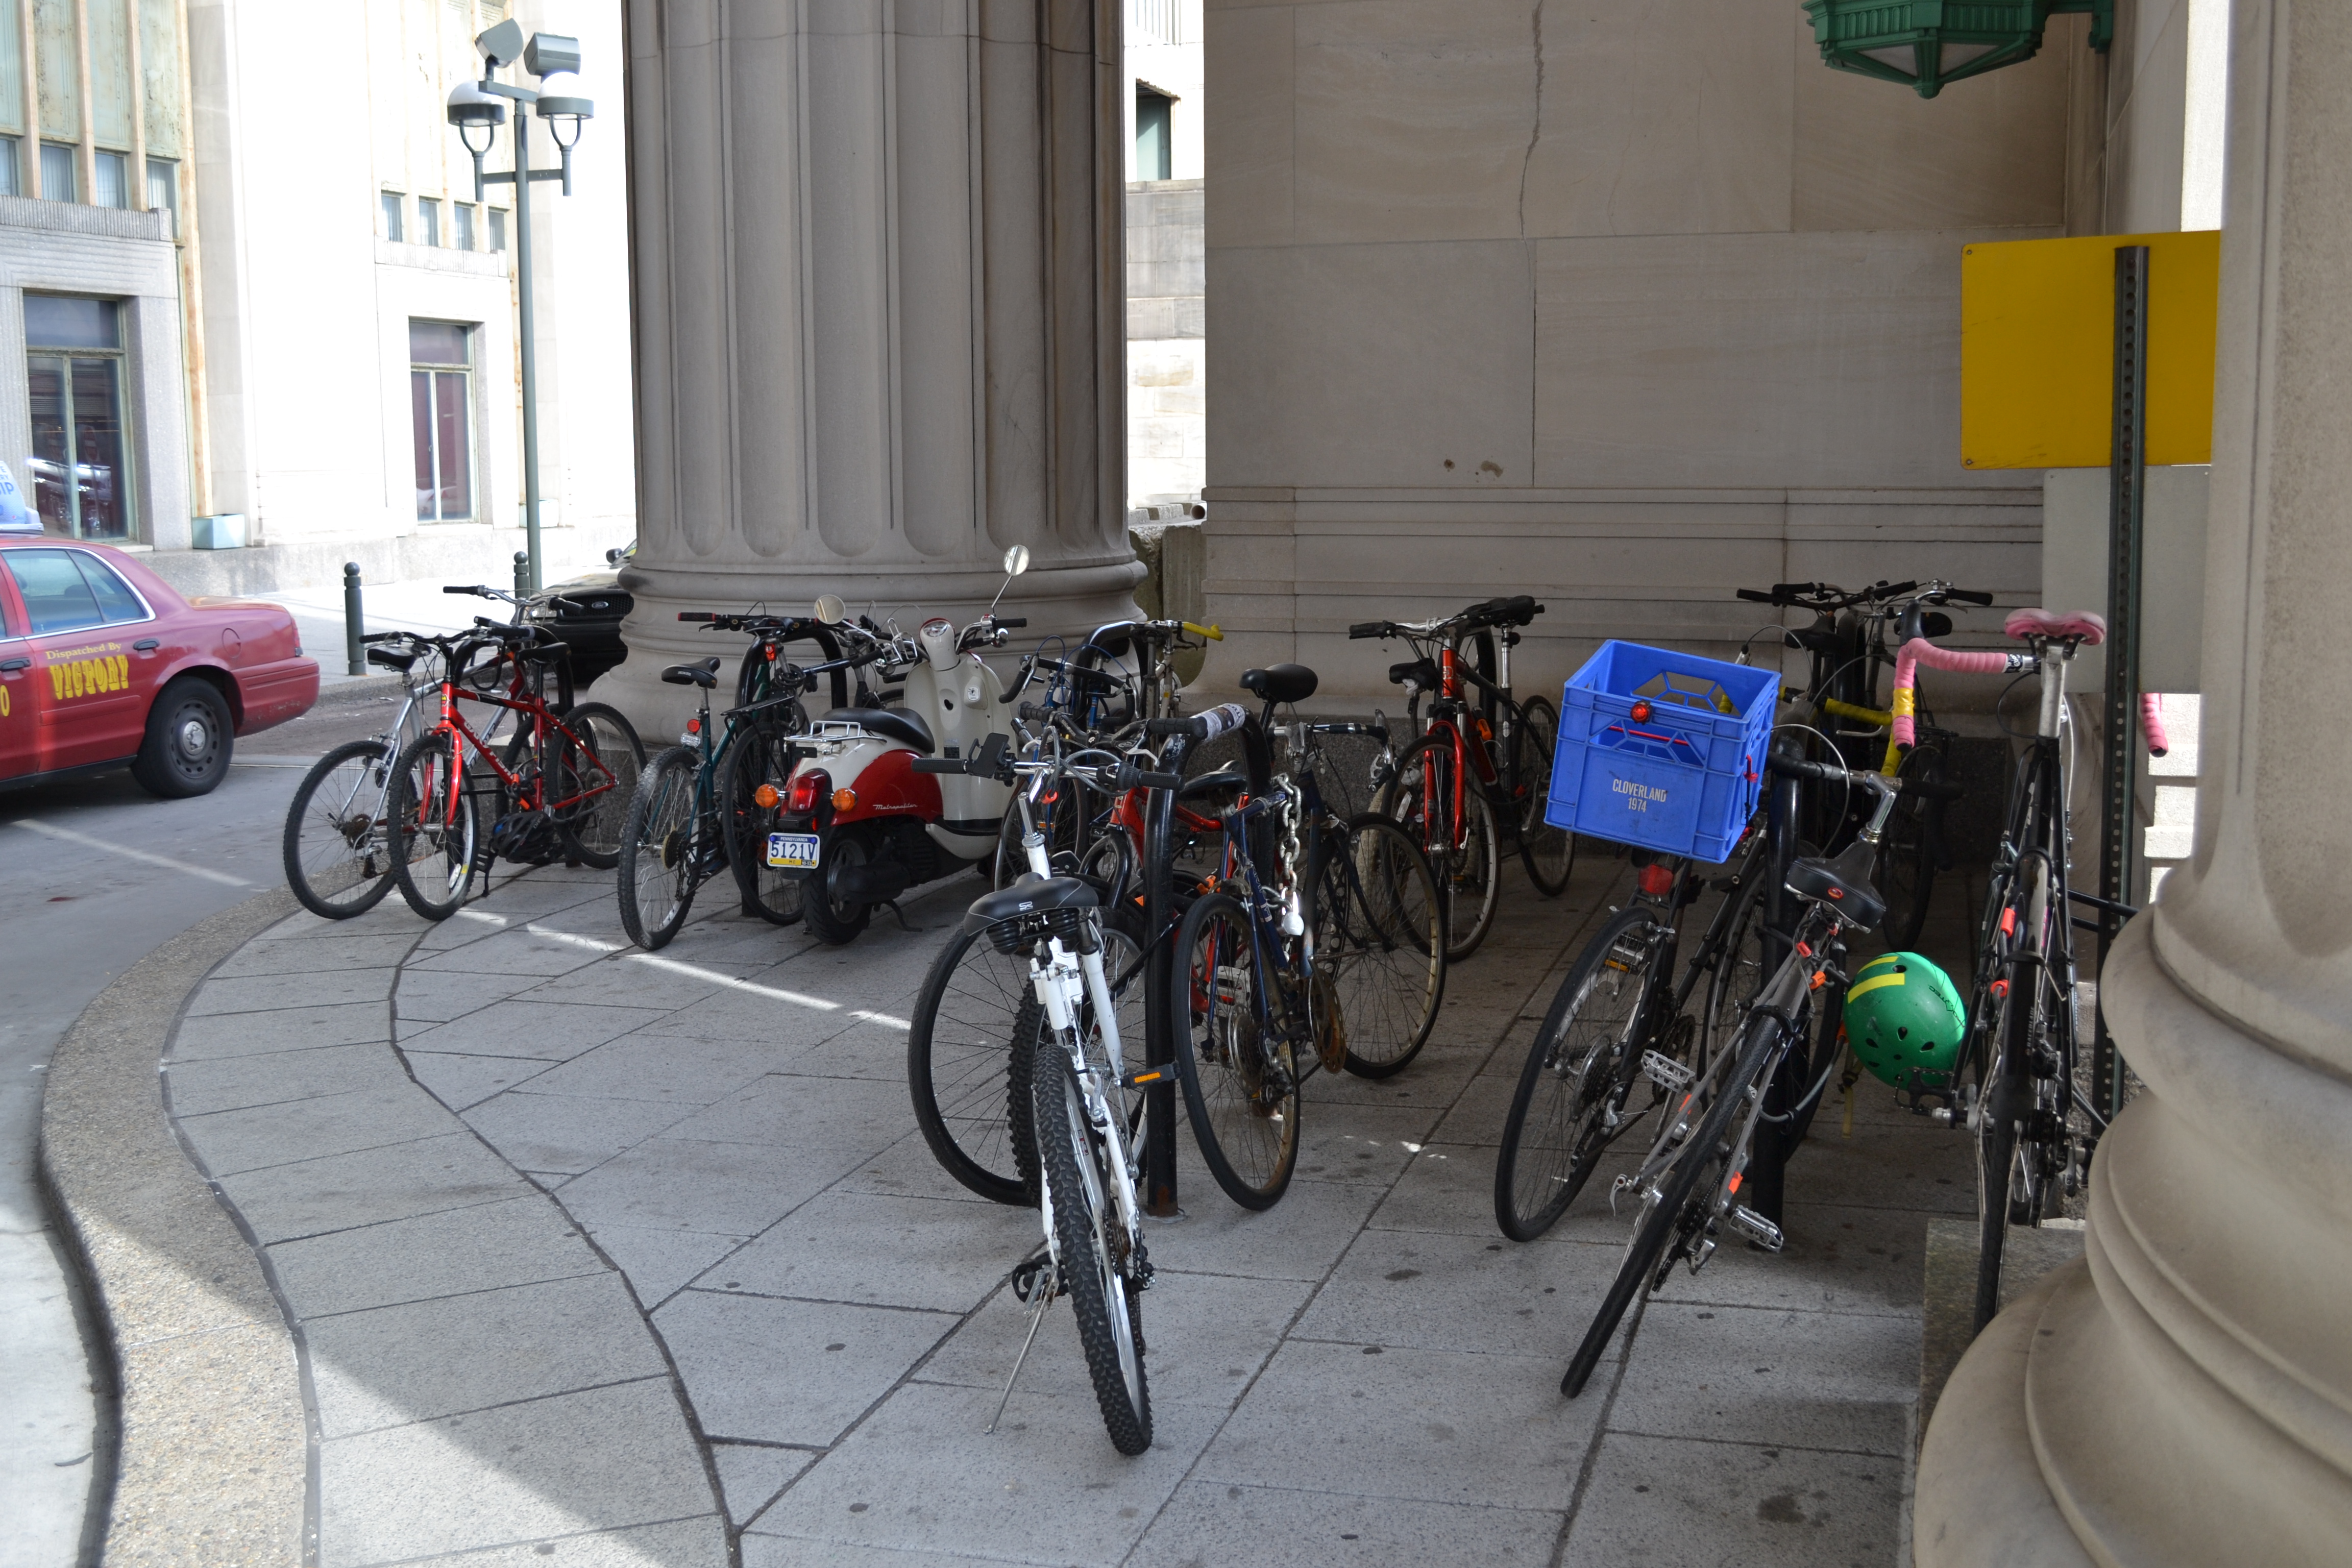 During the week, all bike racks around 30th Street Station fill quickly